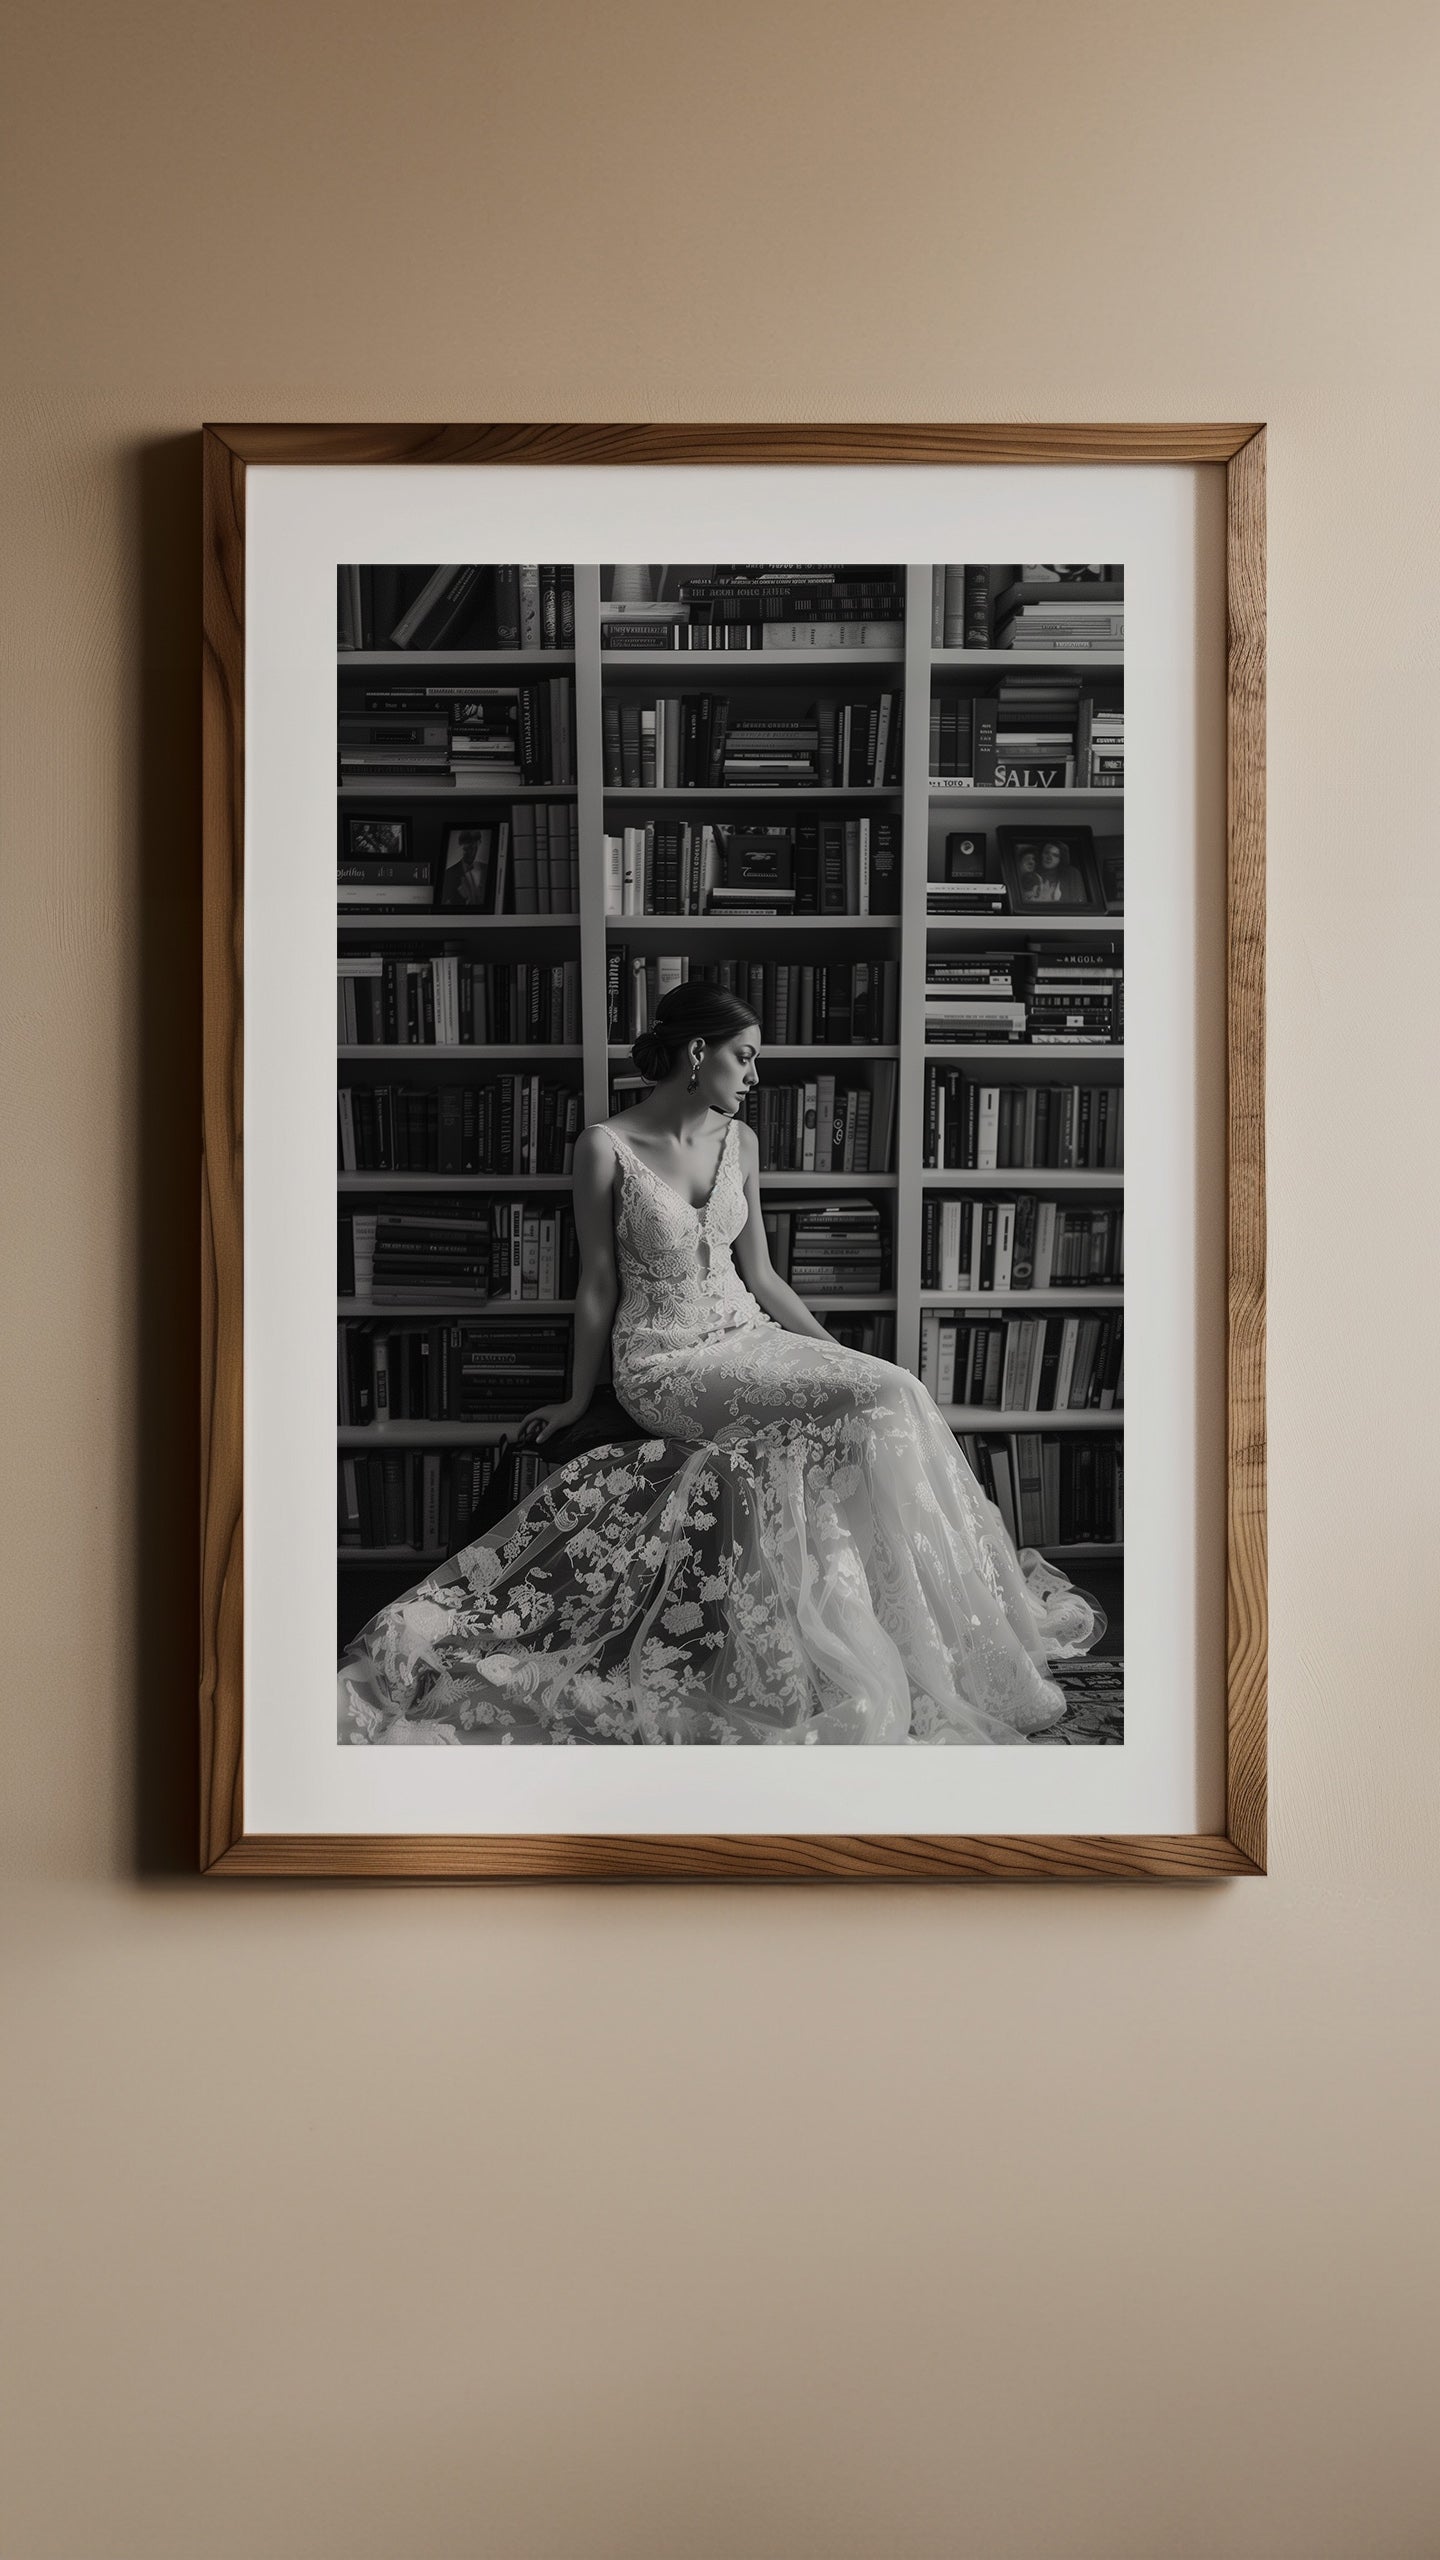 A bride sits pensively among books in 'Bridal Reflections'.